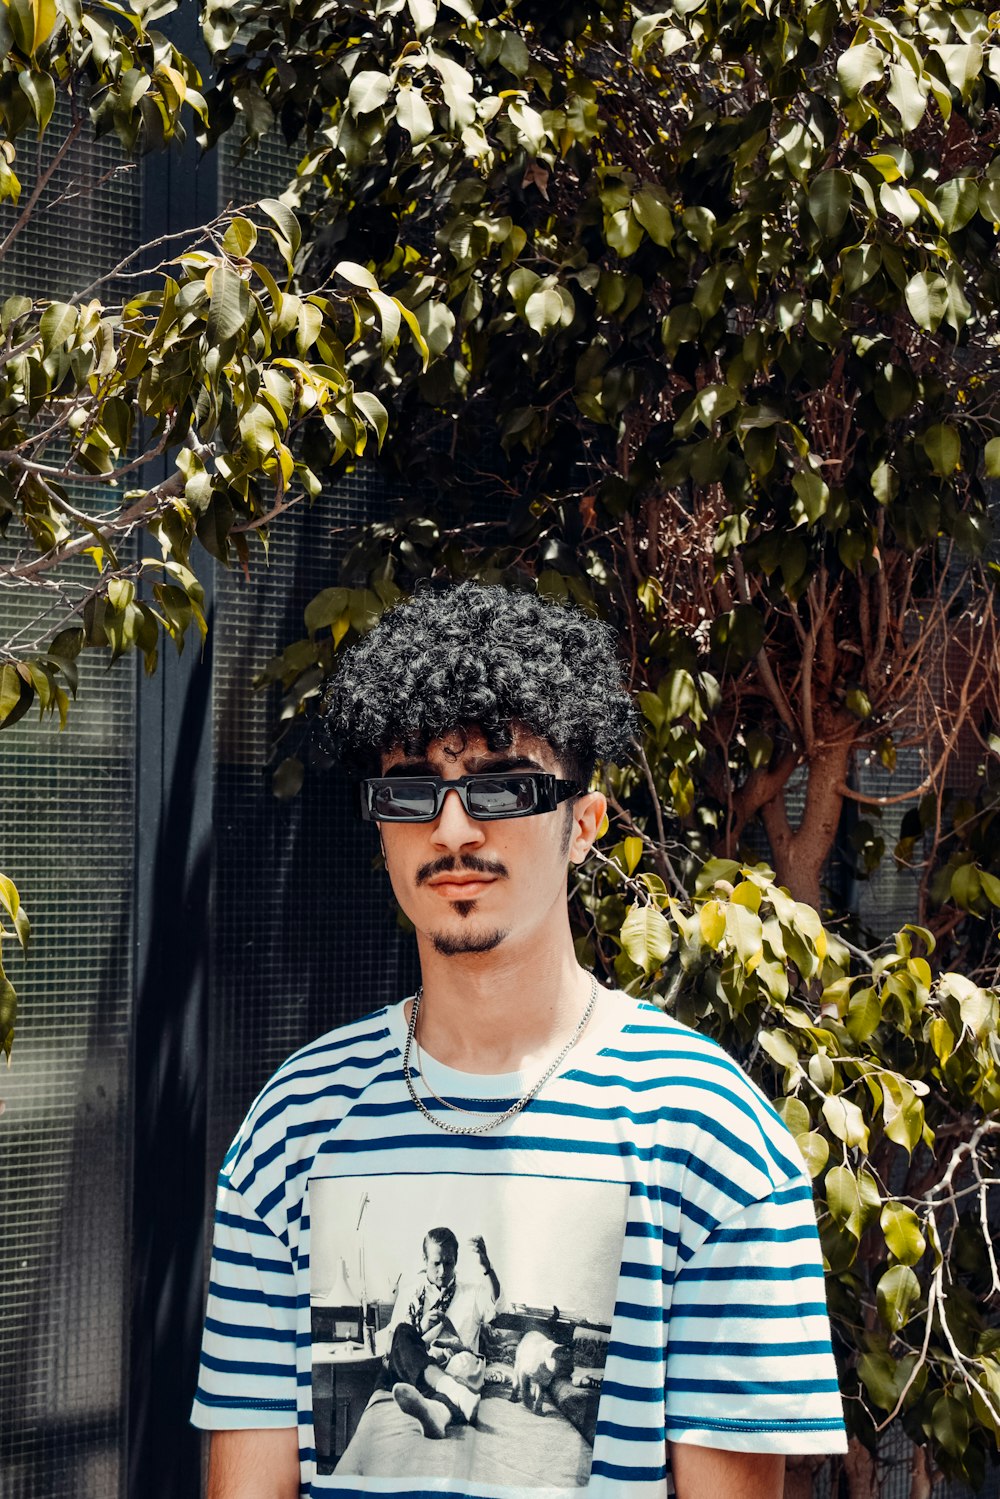 man in blue and white striped crew neck shirt wearing black sunglasses standing beside green plants